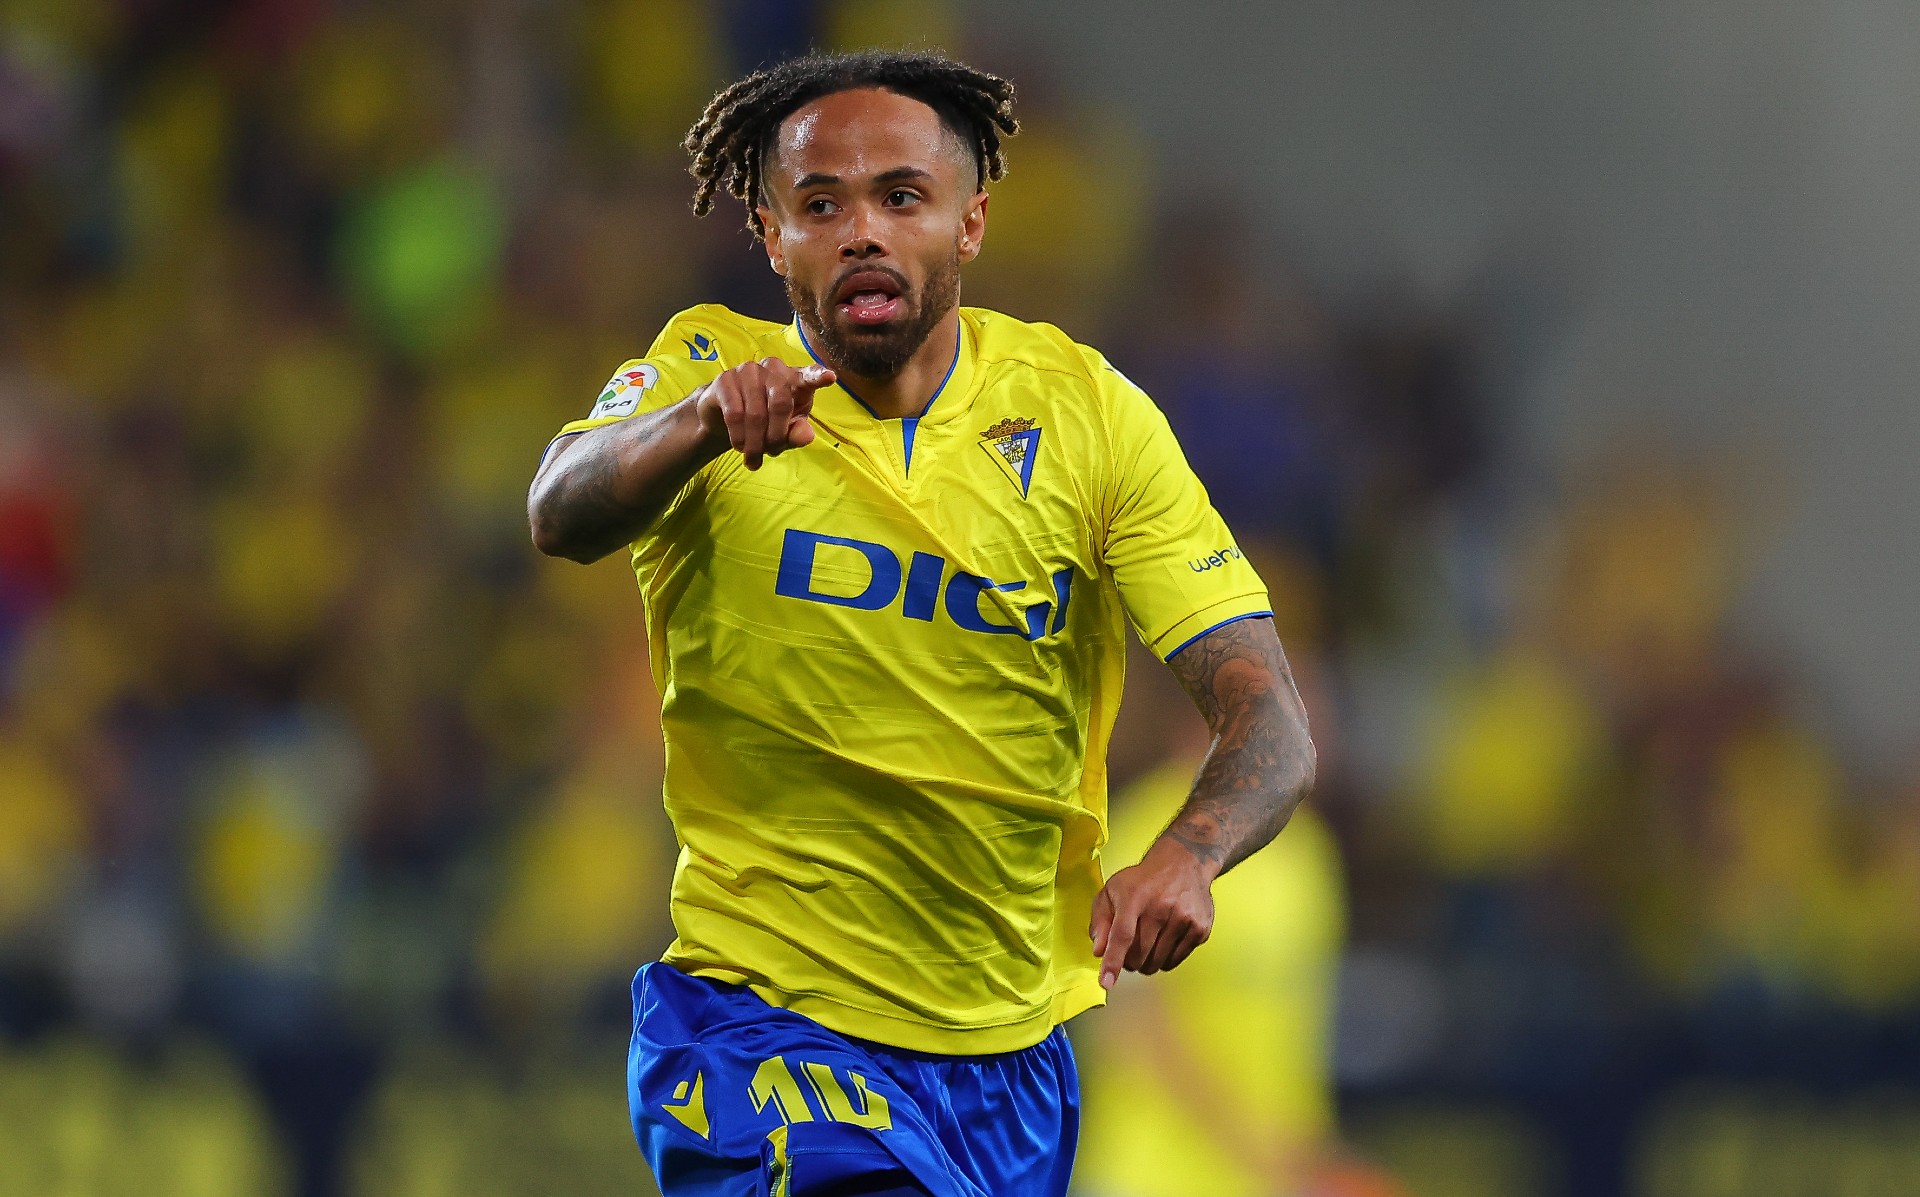 Cadiz lose major asset as star winger exits to join Spartak Moscow